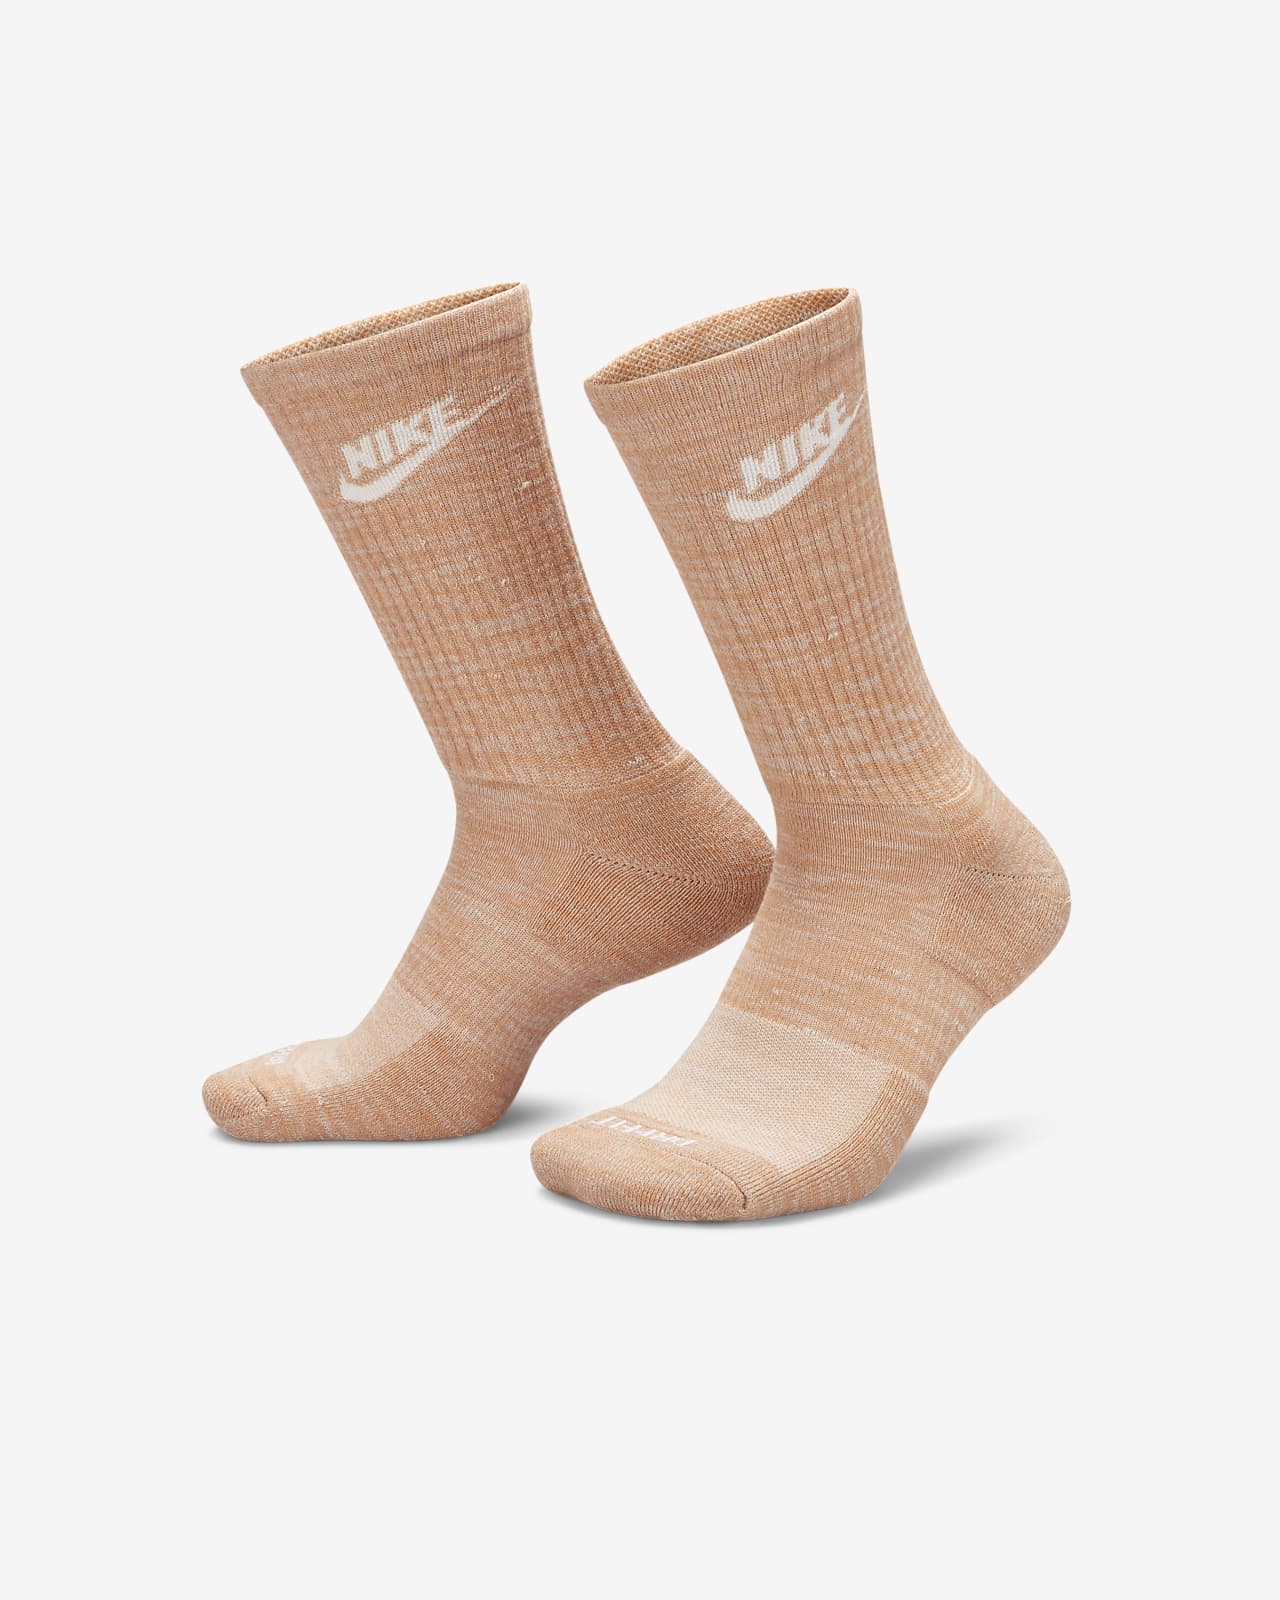 NIKE SPORTSWEAR EVERYDAY ESSENTIAL NOIR/BLANC (3 paires) - CHAUSSETTES HOMME  - Chaussettes - The Golf Square